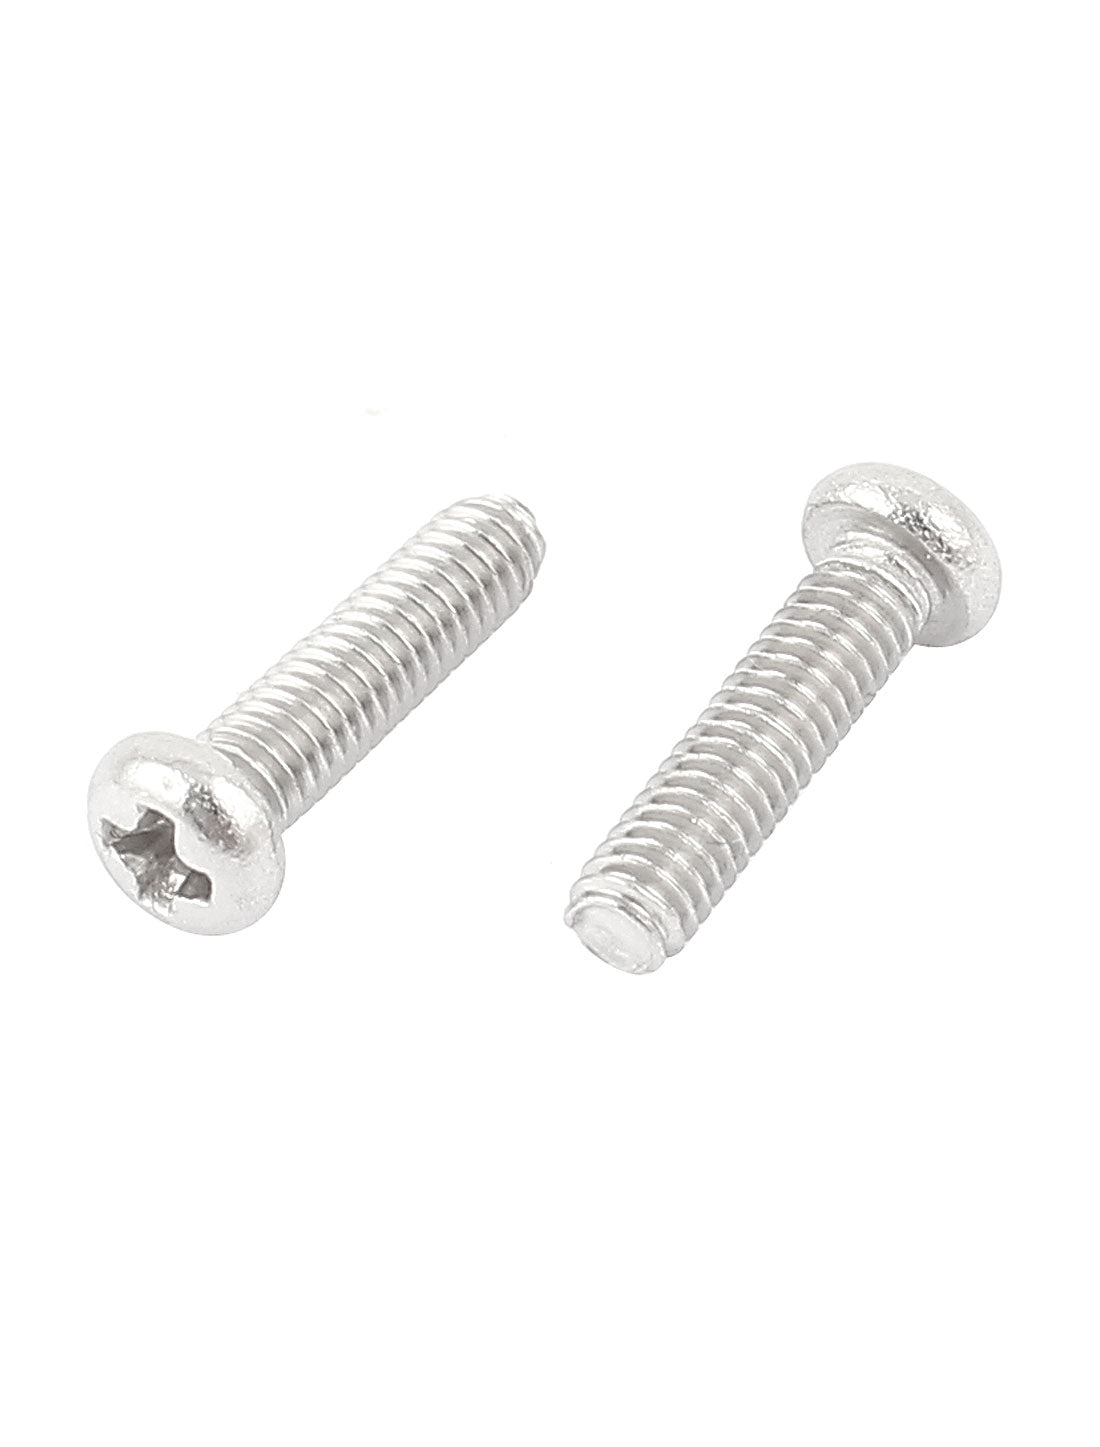 uxcell Uxcell M2.5 x 10mm 304 Stainless Steel Phillips Round Head Screws Bolt 4mm Head (Pack of 60)